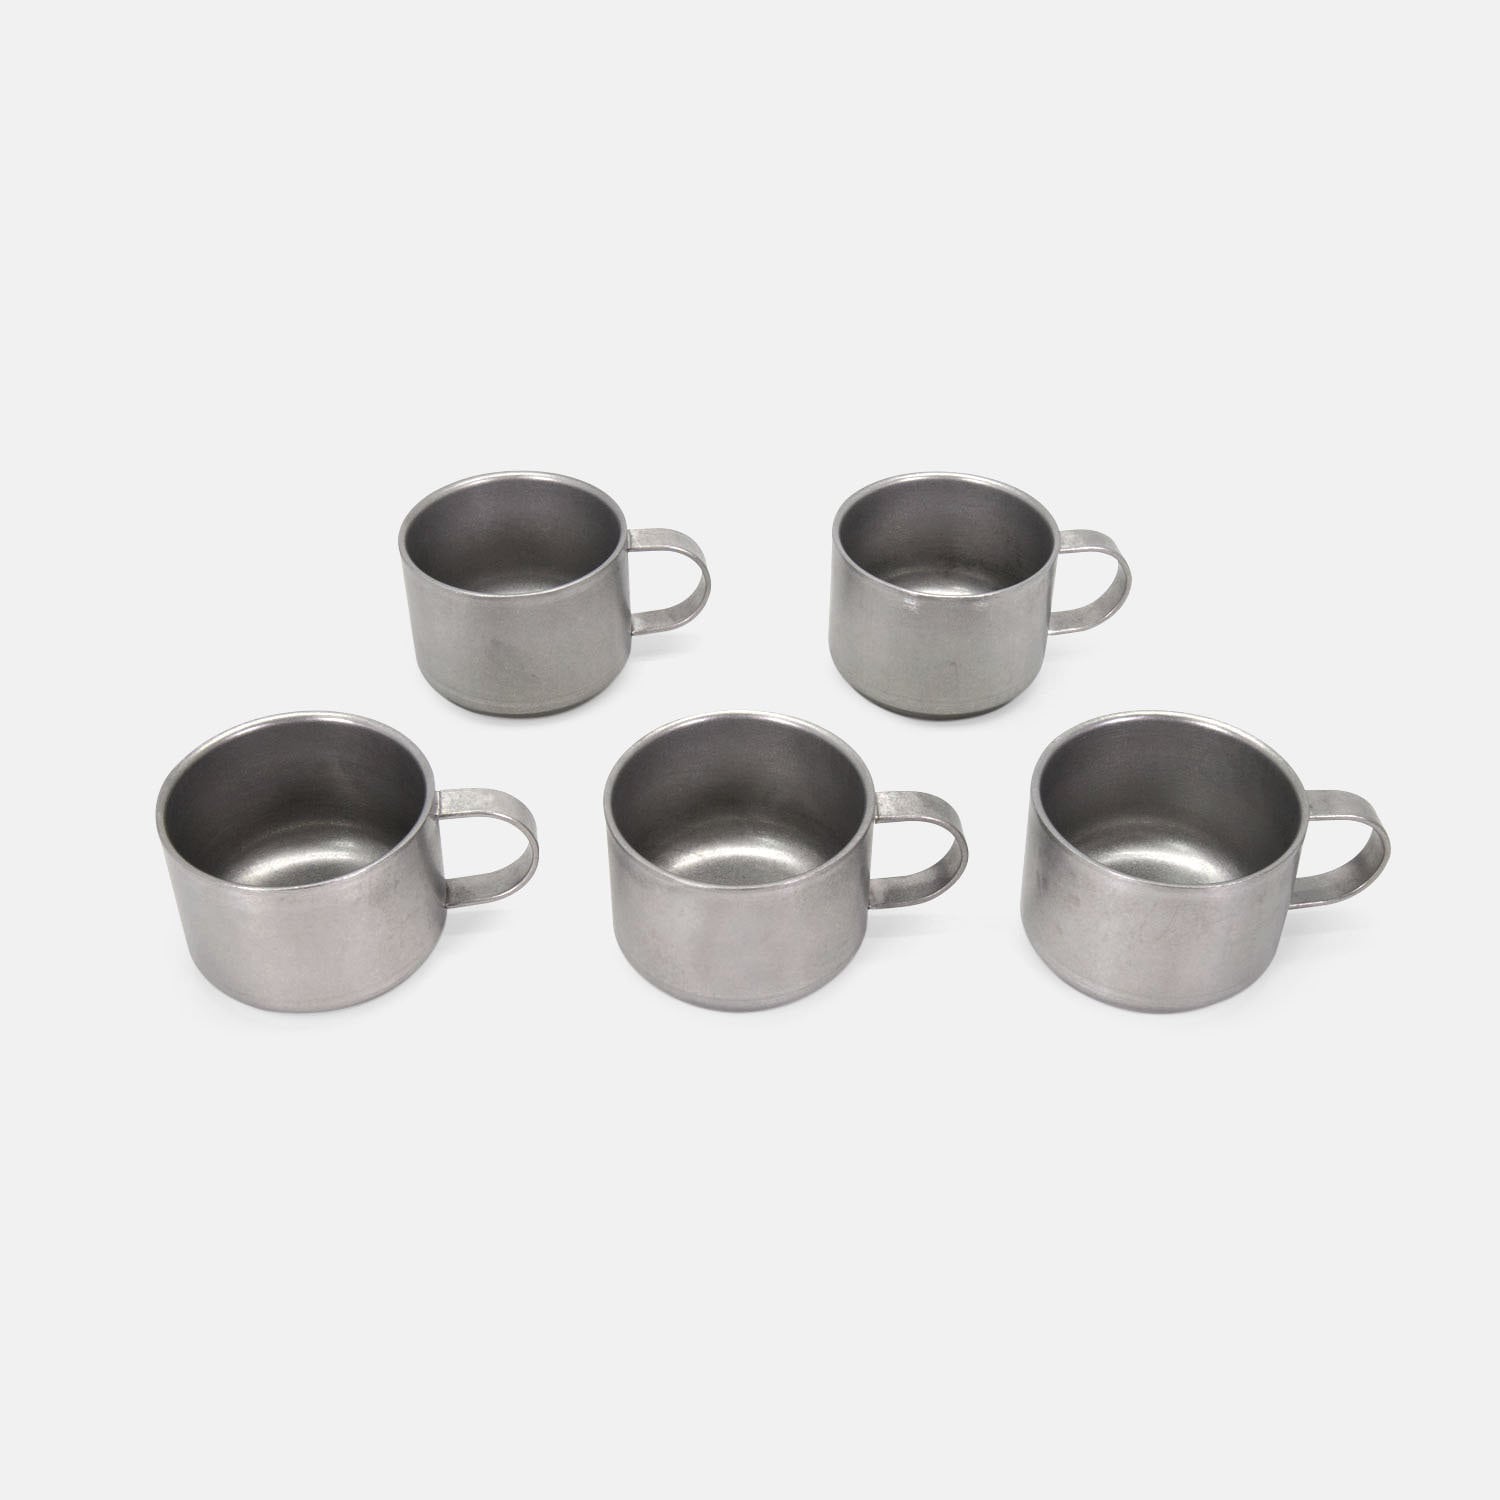 Stainless Steel Good Quality Coffee Cup Holder/Tea Cup Stand